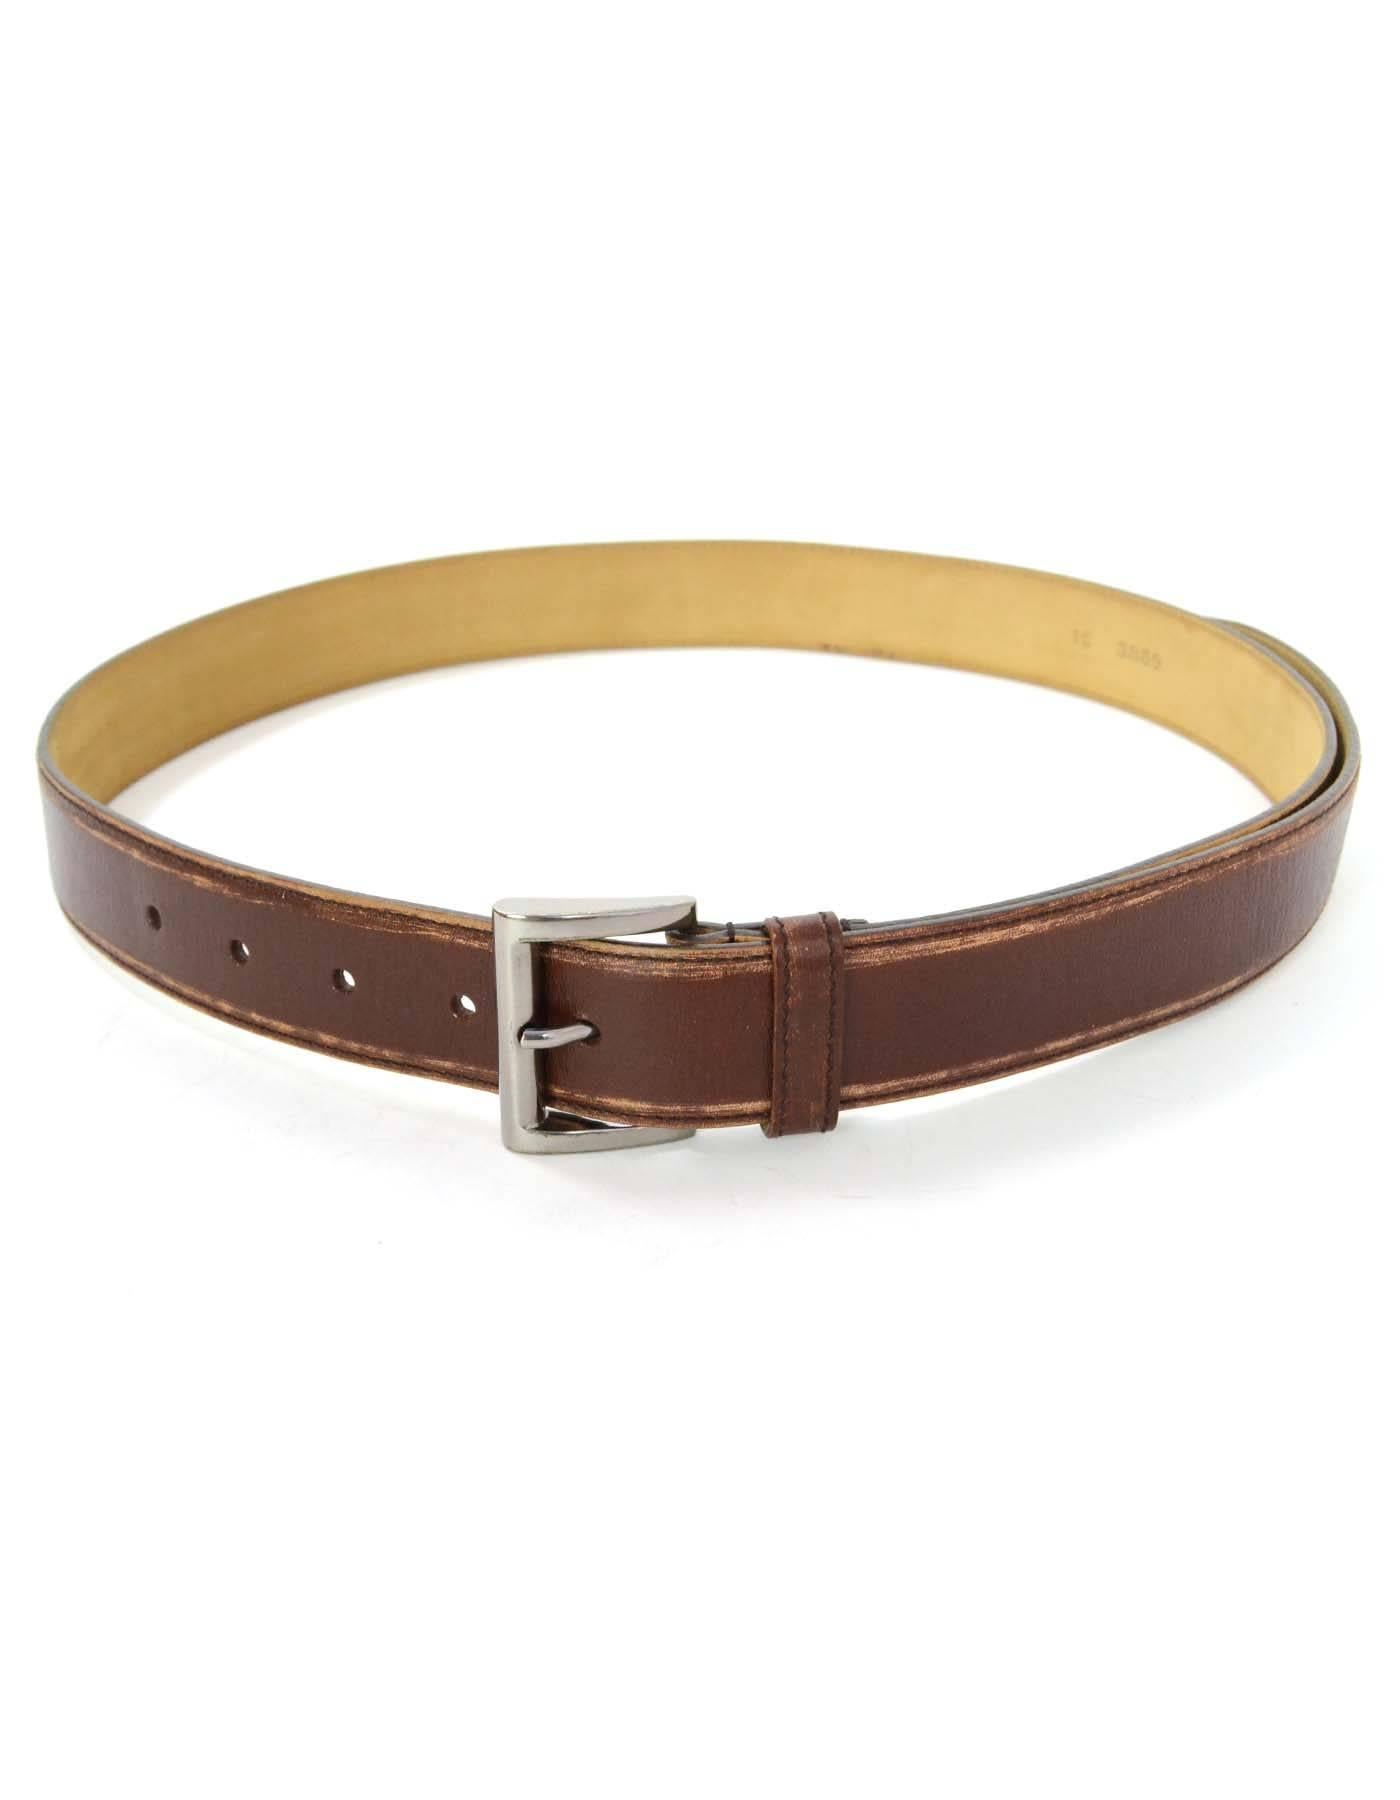 Prada Brown Distressed Leather Belt
Made In: Italy
Color: Brown
Hardware: Gunmetal
Materials: Distressed leather
Closure/Opening: Buckle and notch closure
Stamp: 1C 3889
Overall Condition: Excellent pre-owned condition
Includes: Prada dust